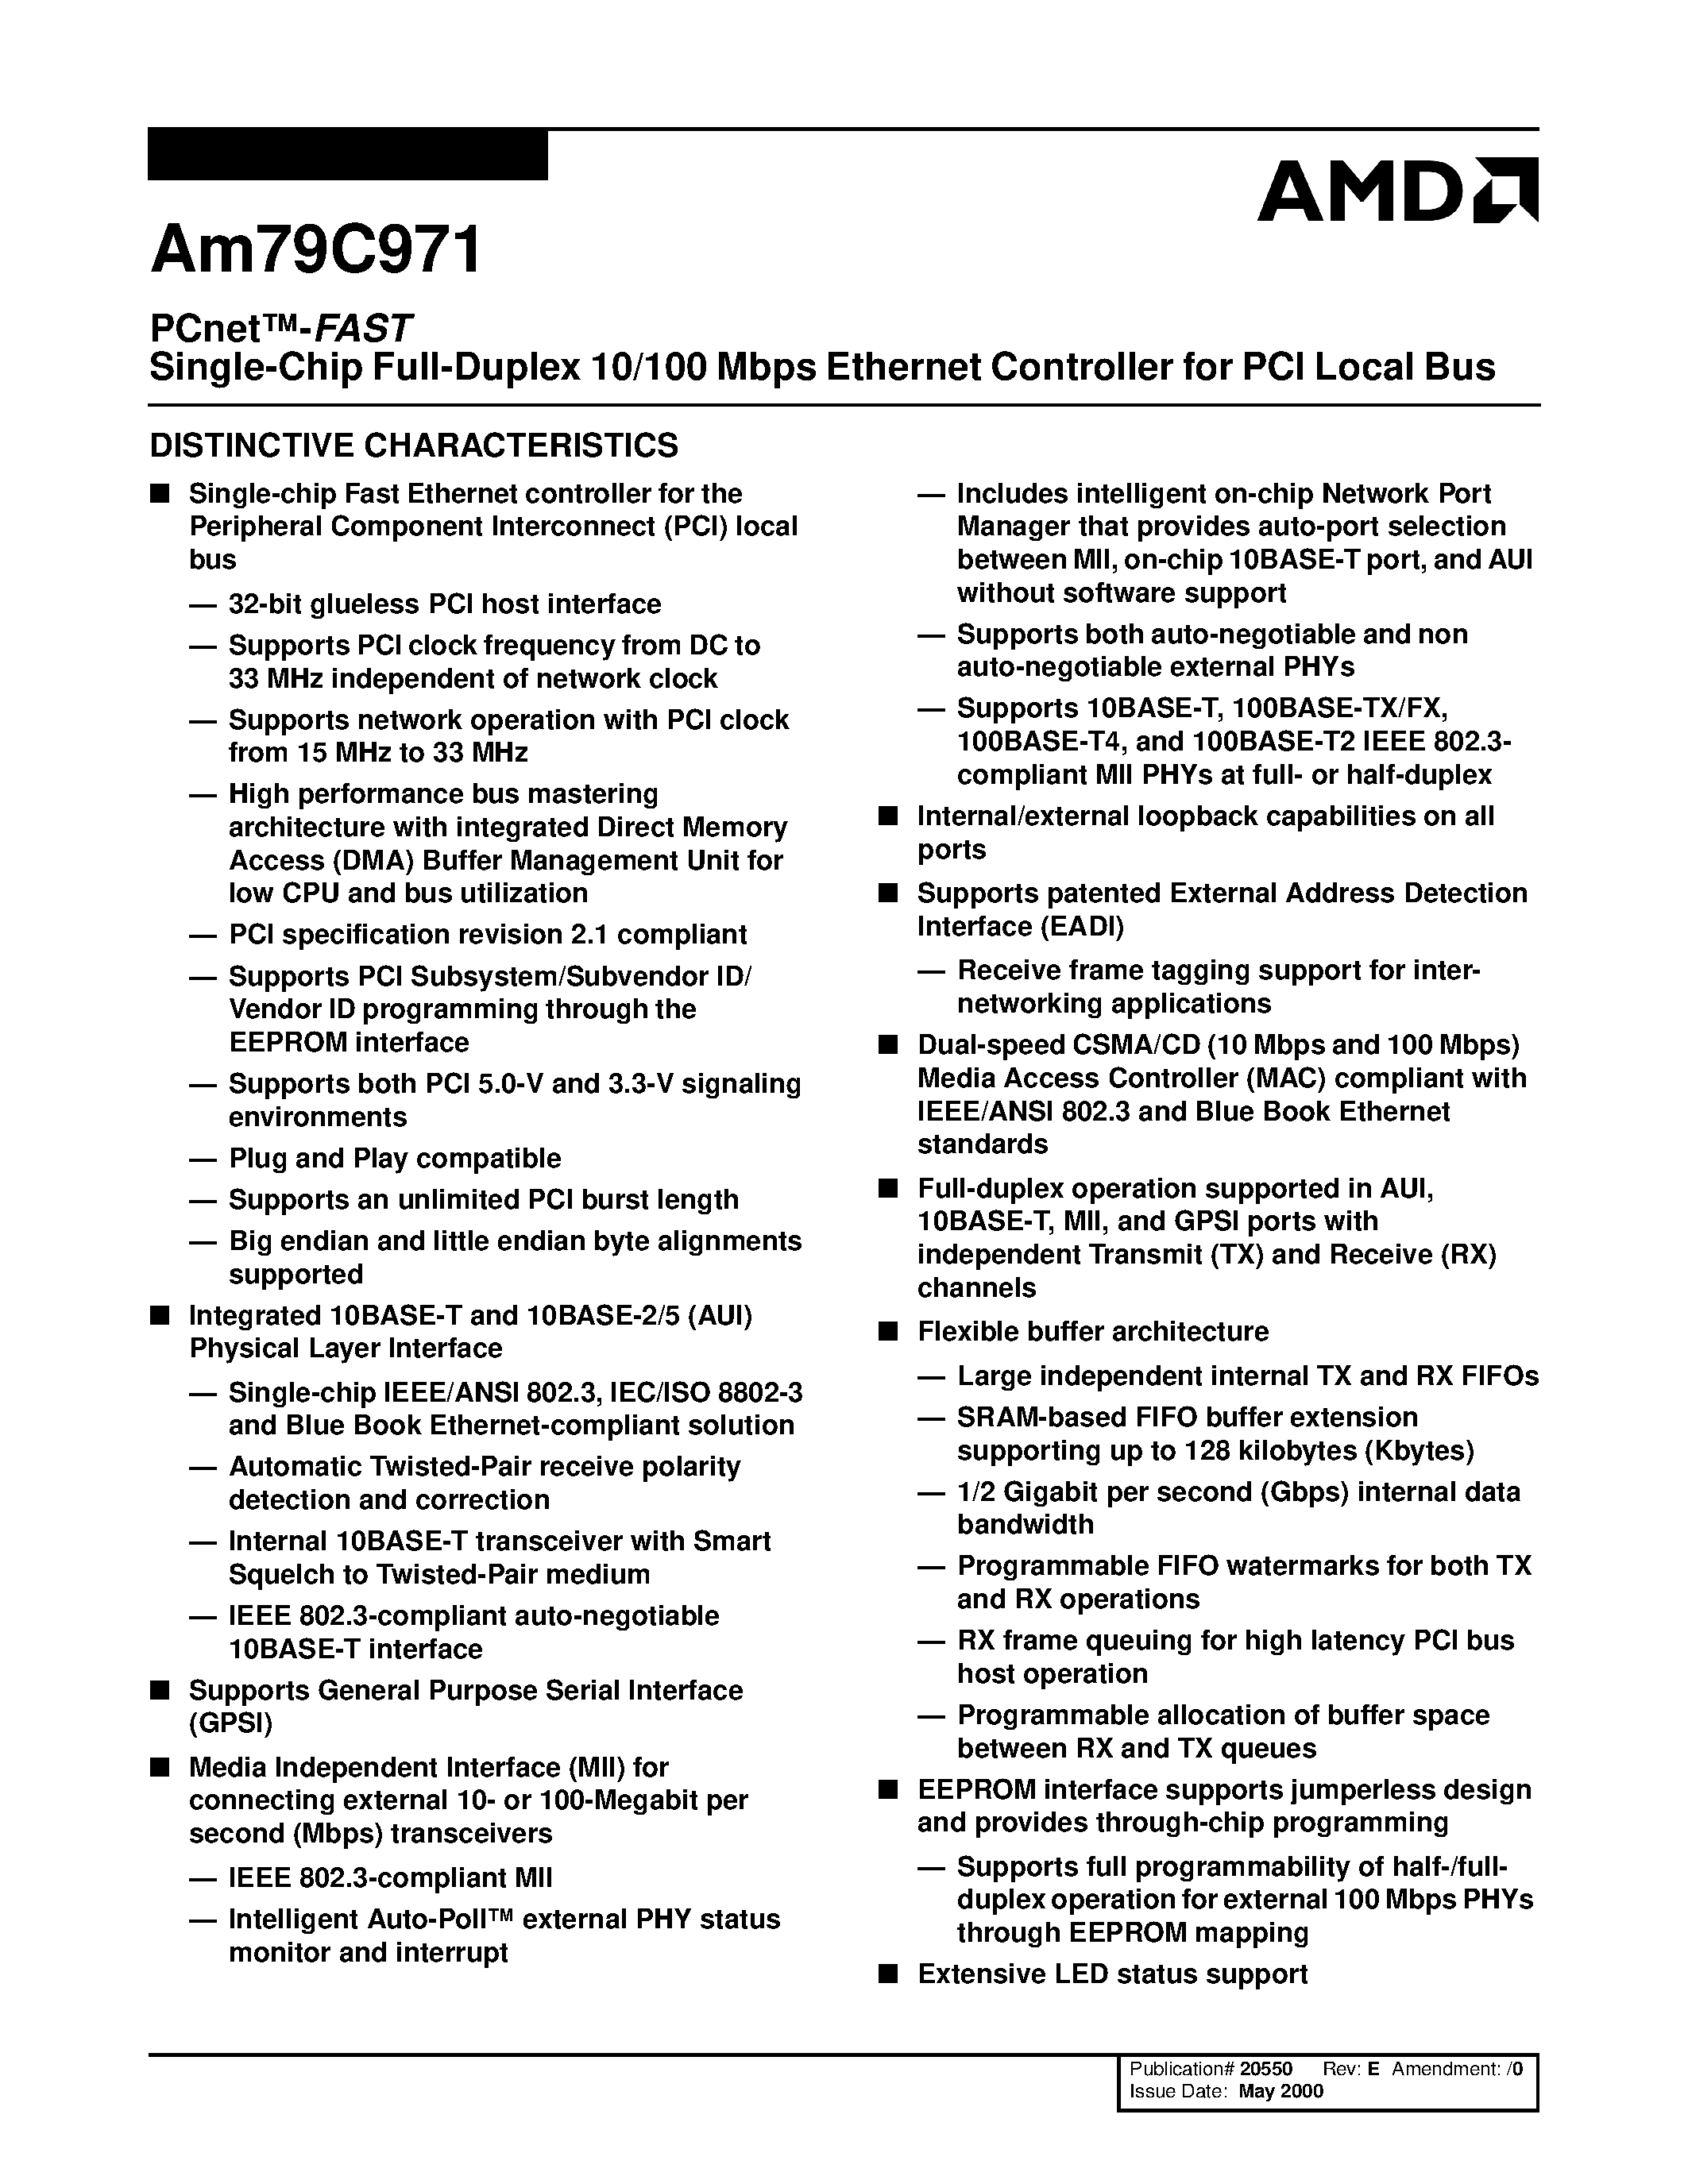 Datasheet Am79C971VCW - PCnet-FAST Single-Chip Full-Duplex 10/100 Mbps Ethernet Controller for PCI Local Bus page 1